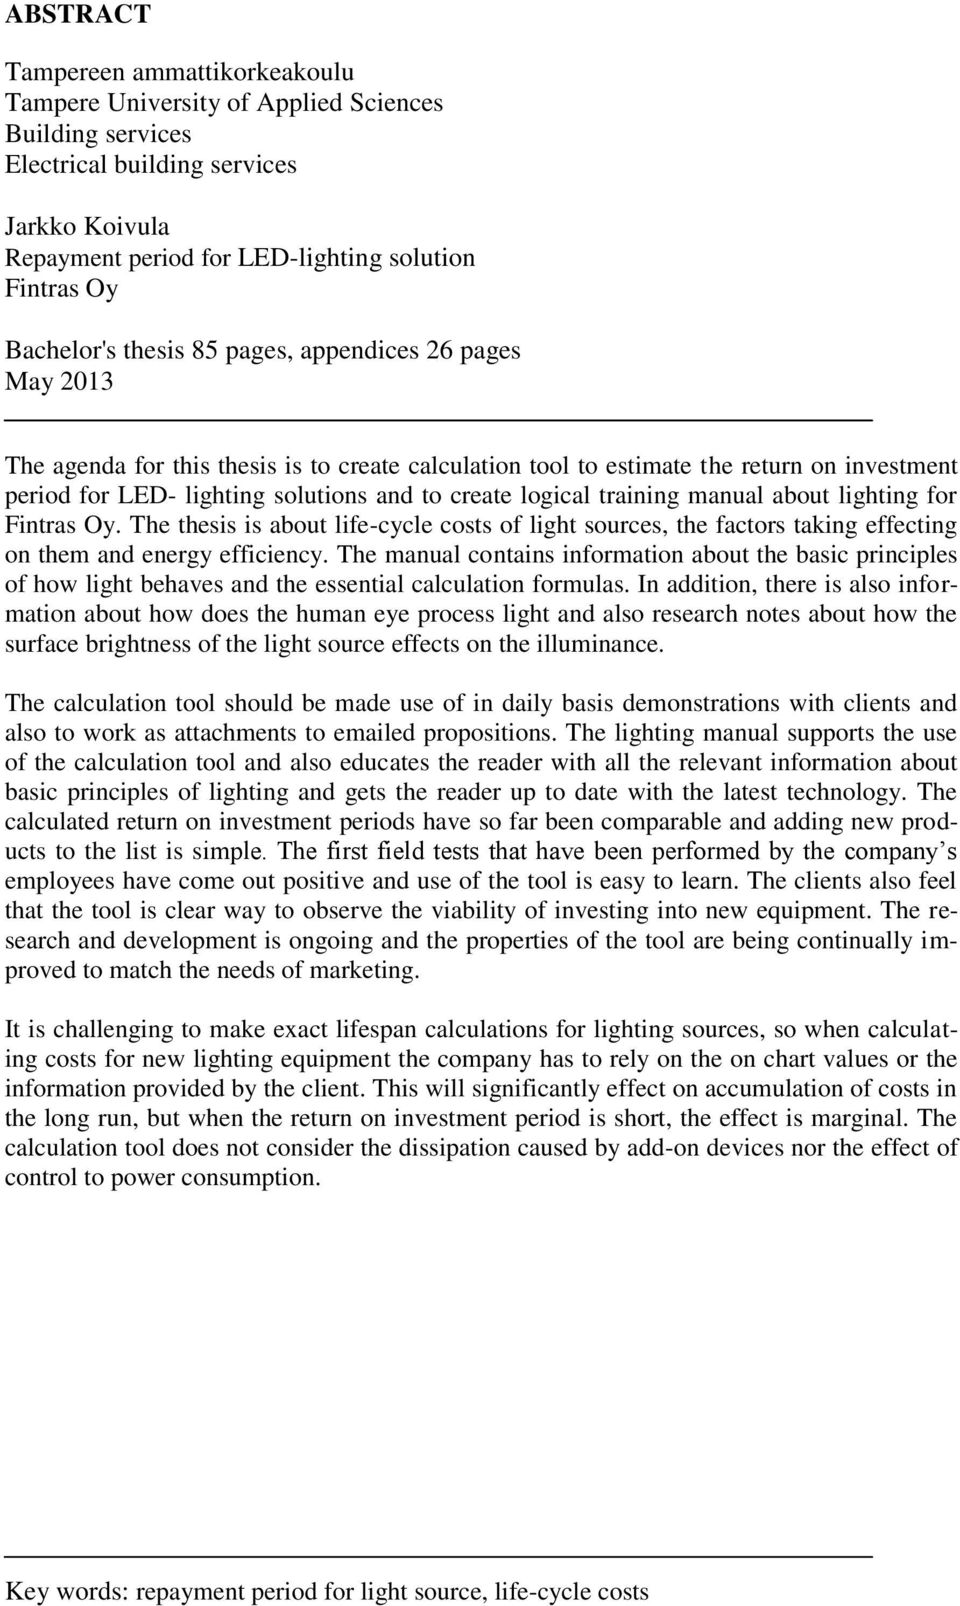 logical training manual about lighting for Fintras Oy. The thesis is about life-cycle costs of light sources, the factors taking effecting on them and energy efficiency.